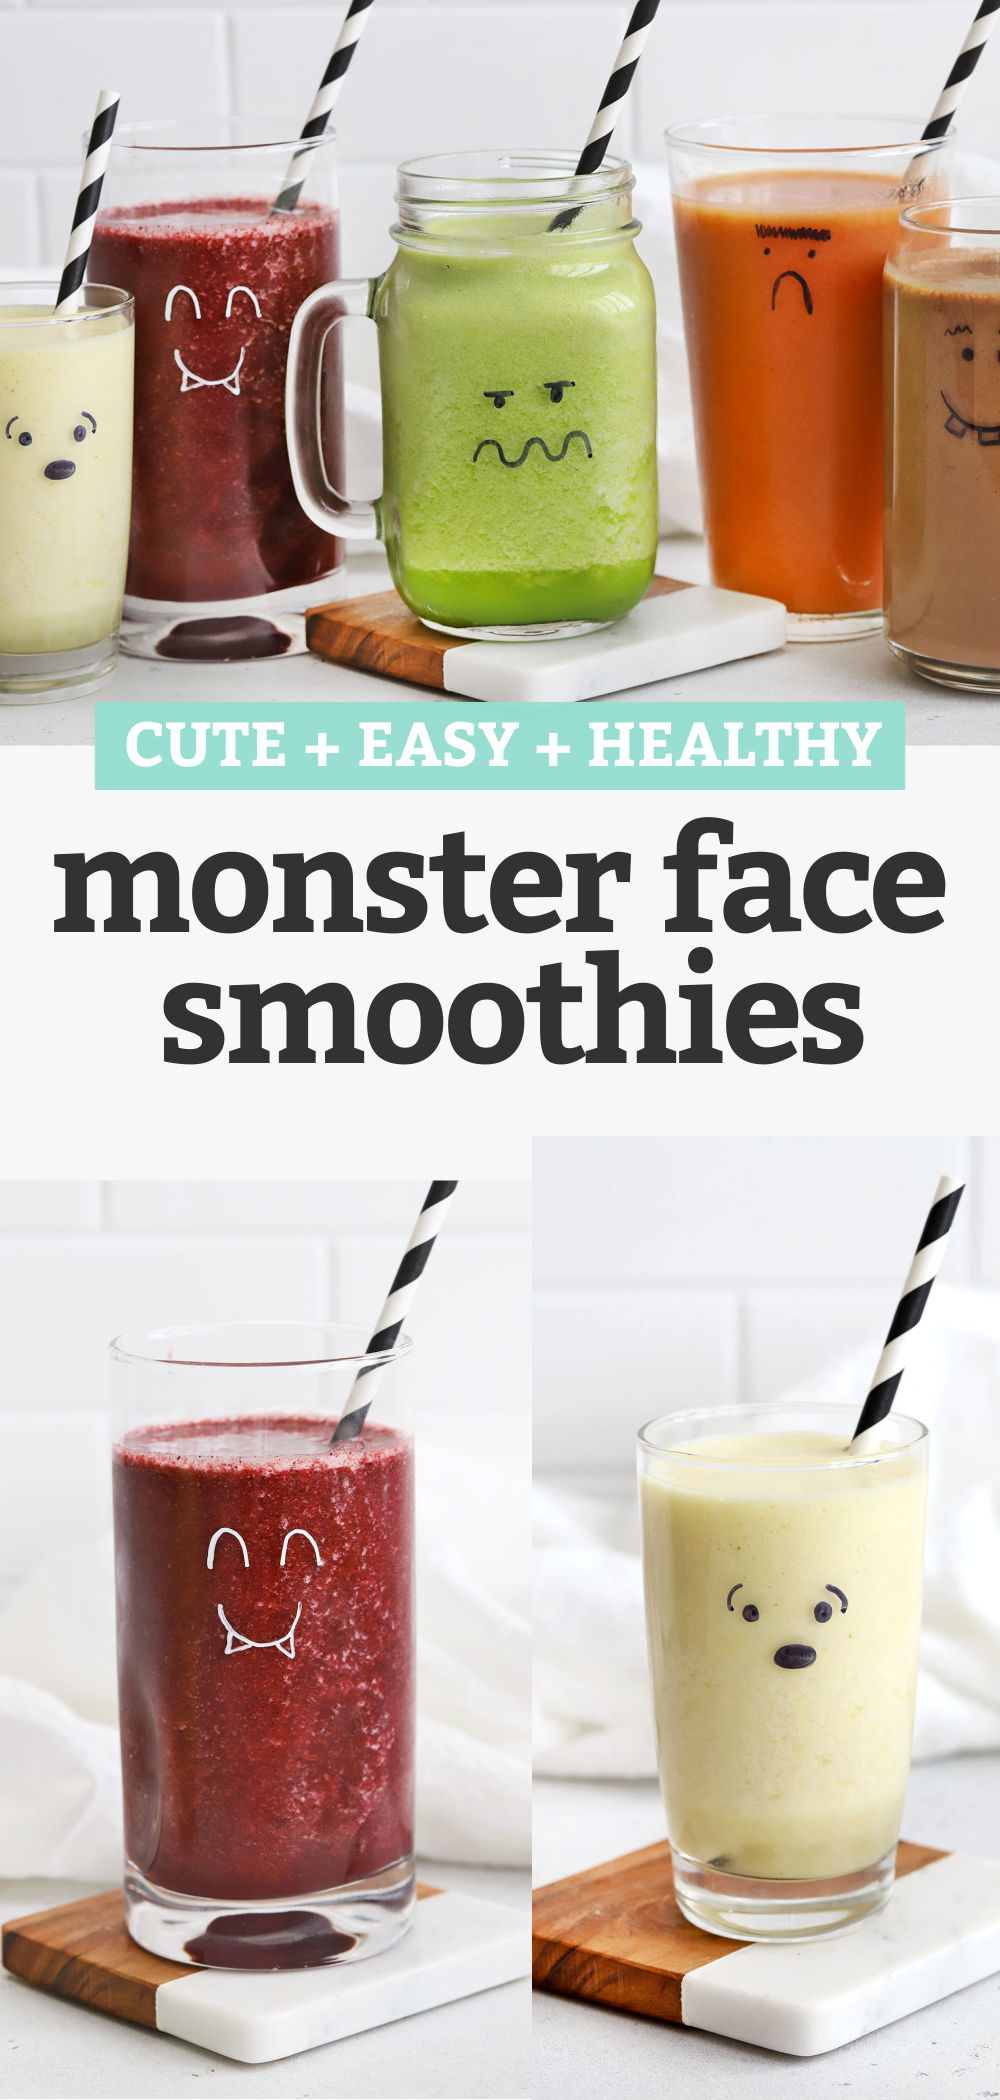 Halloween Monster Smoothies - Learn how to use a marker to make adorable monster smoothies on your smoothie cups. The perfect Halloween breakfast or healthy Hallowen snack! // Halloween ideas for kids // green monster smoothie // halloween party food #halloween #fallrecipe #halloweensnack #healthysnack